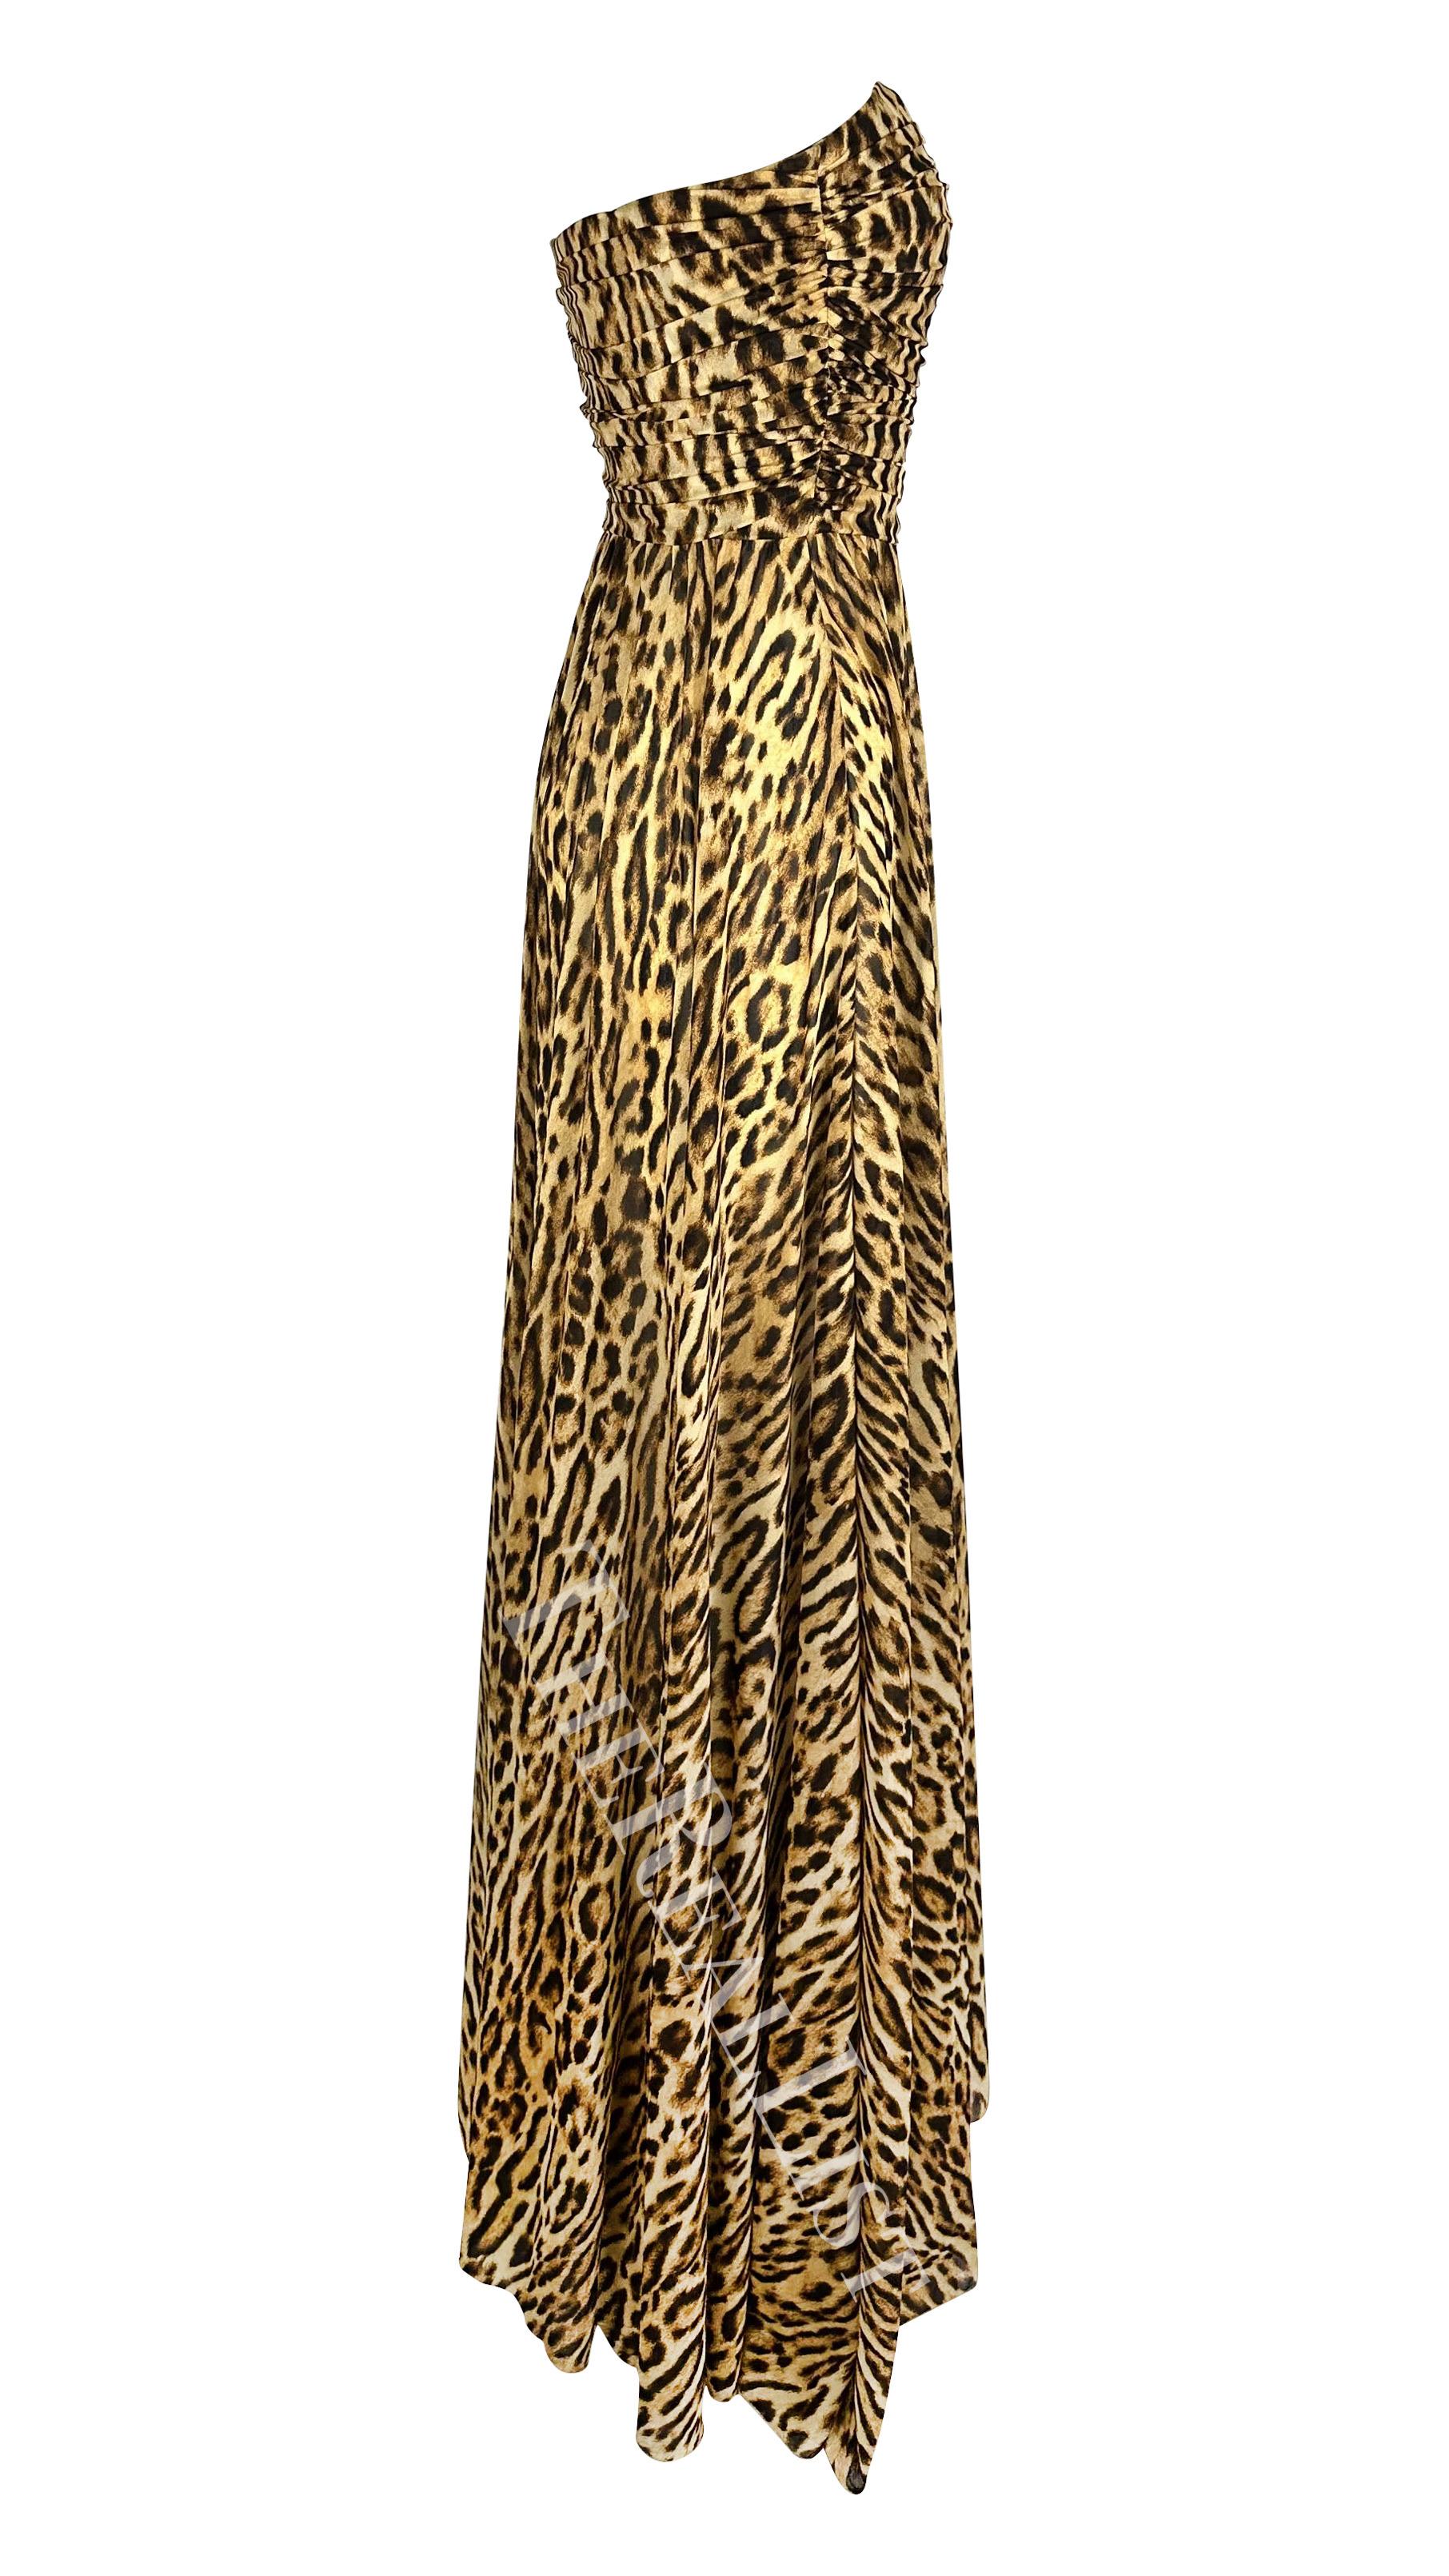 NWT F/W 2004 Celine by Michael Kors Runway Strapless Cheetah Print Gown  For Sale 6